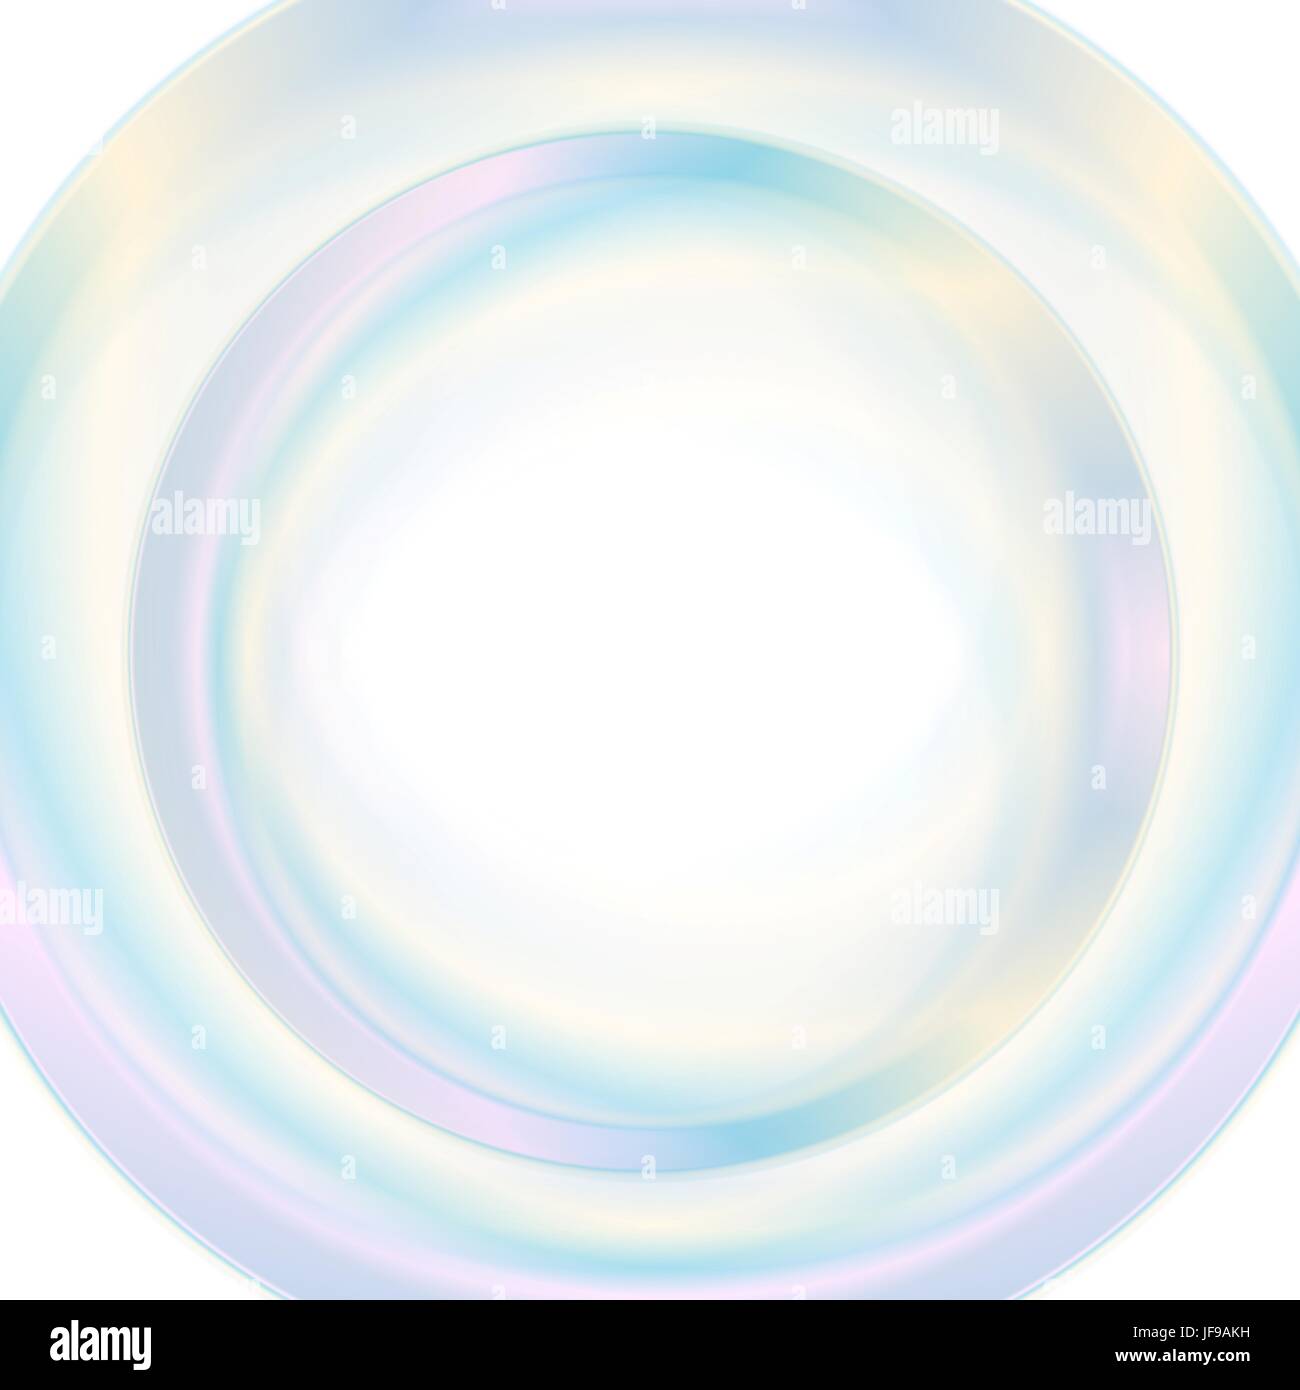 Colorful abstract circle on white background Stock Photo